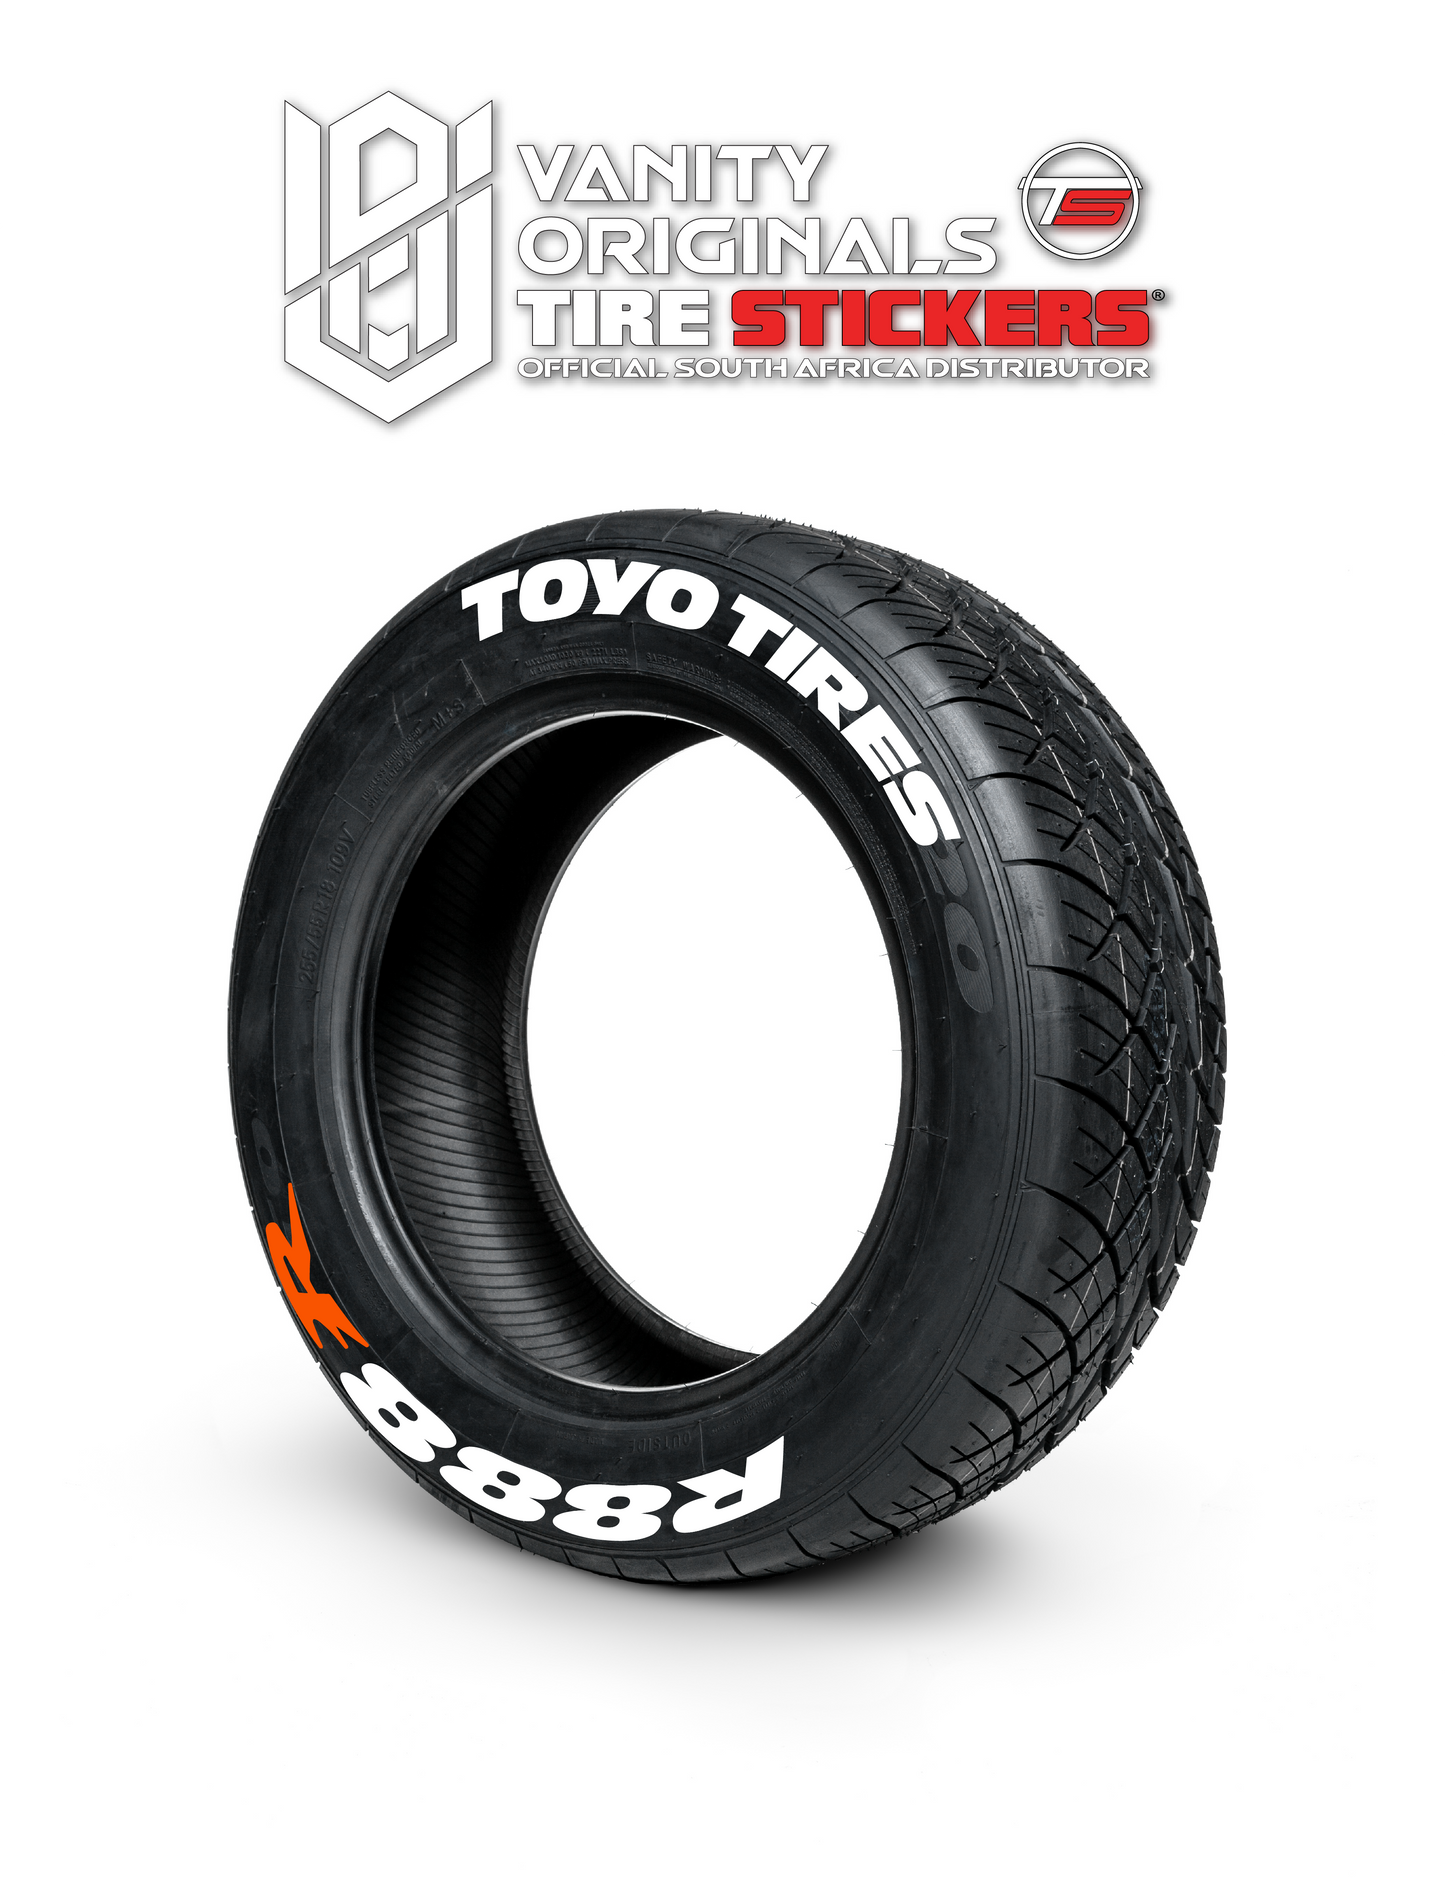 Toyo Tires R888 R ( 8x Rubber Decals, Adhesive & Instructions Included )